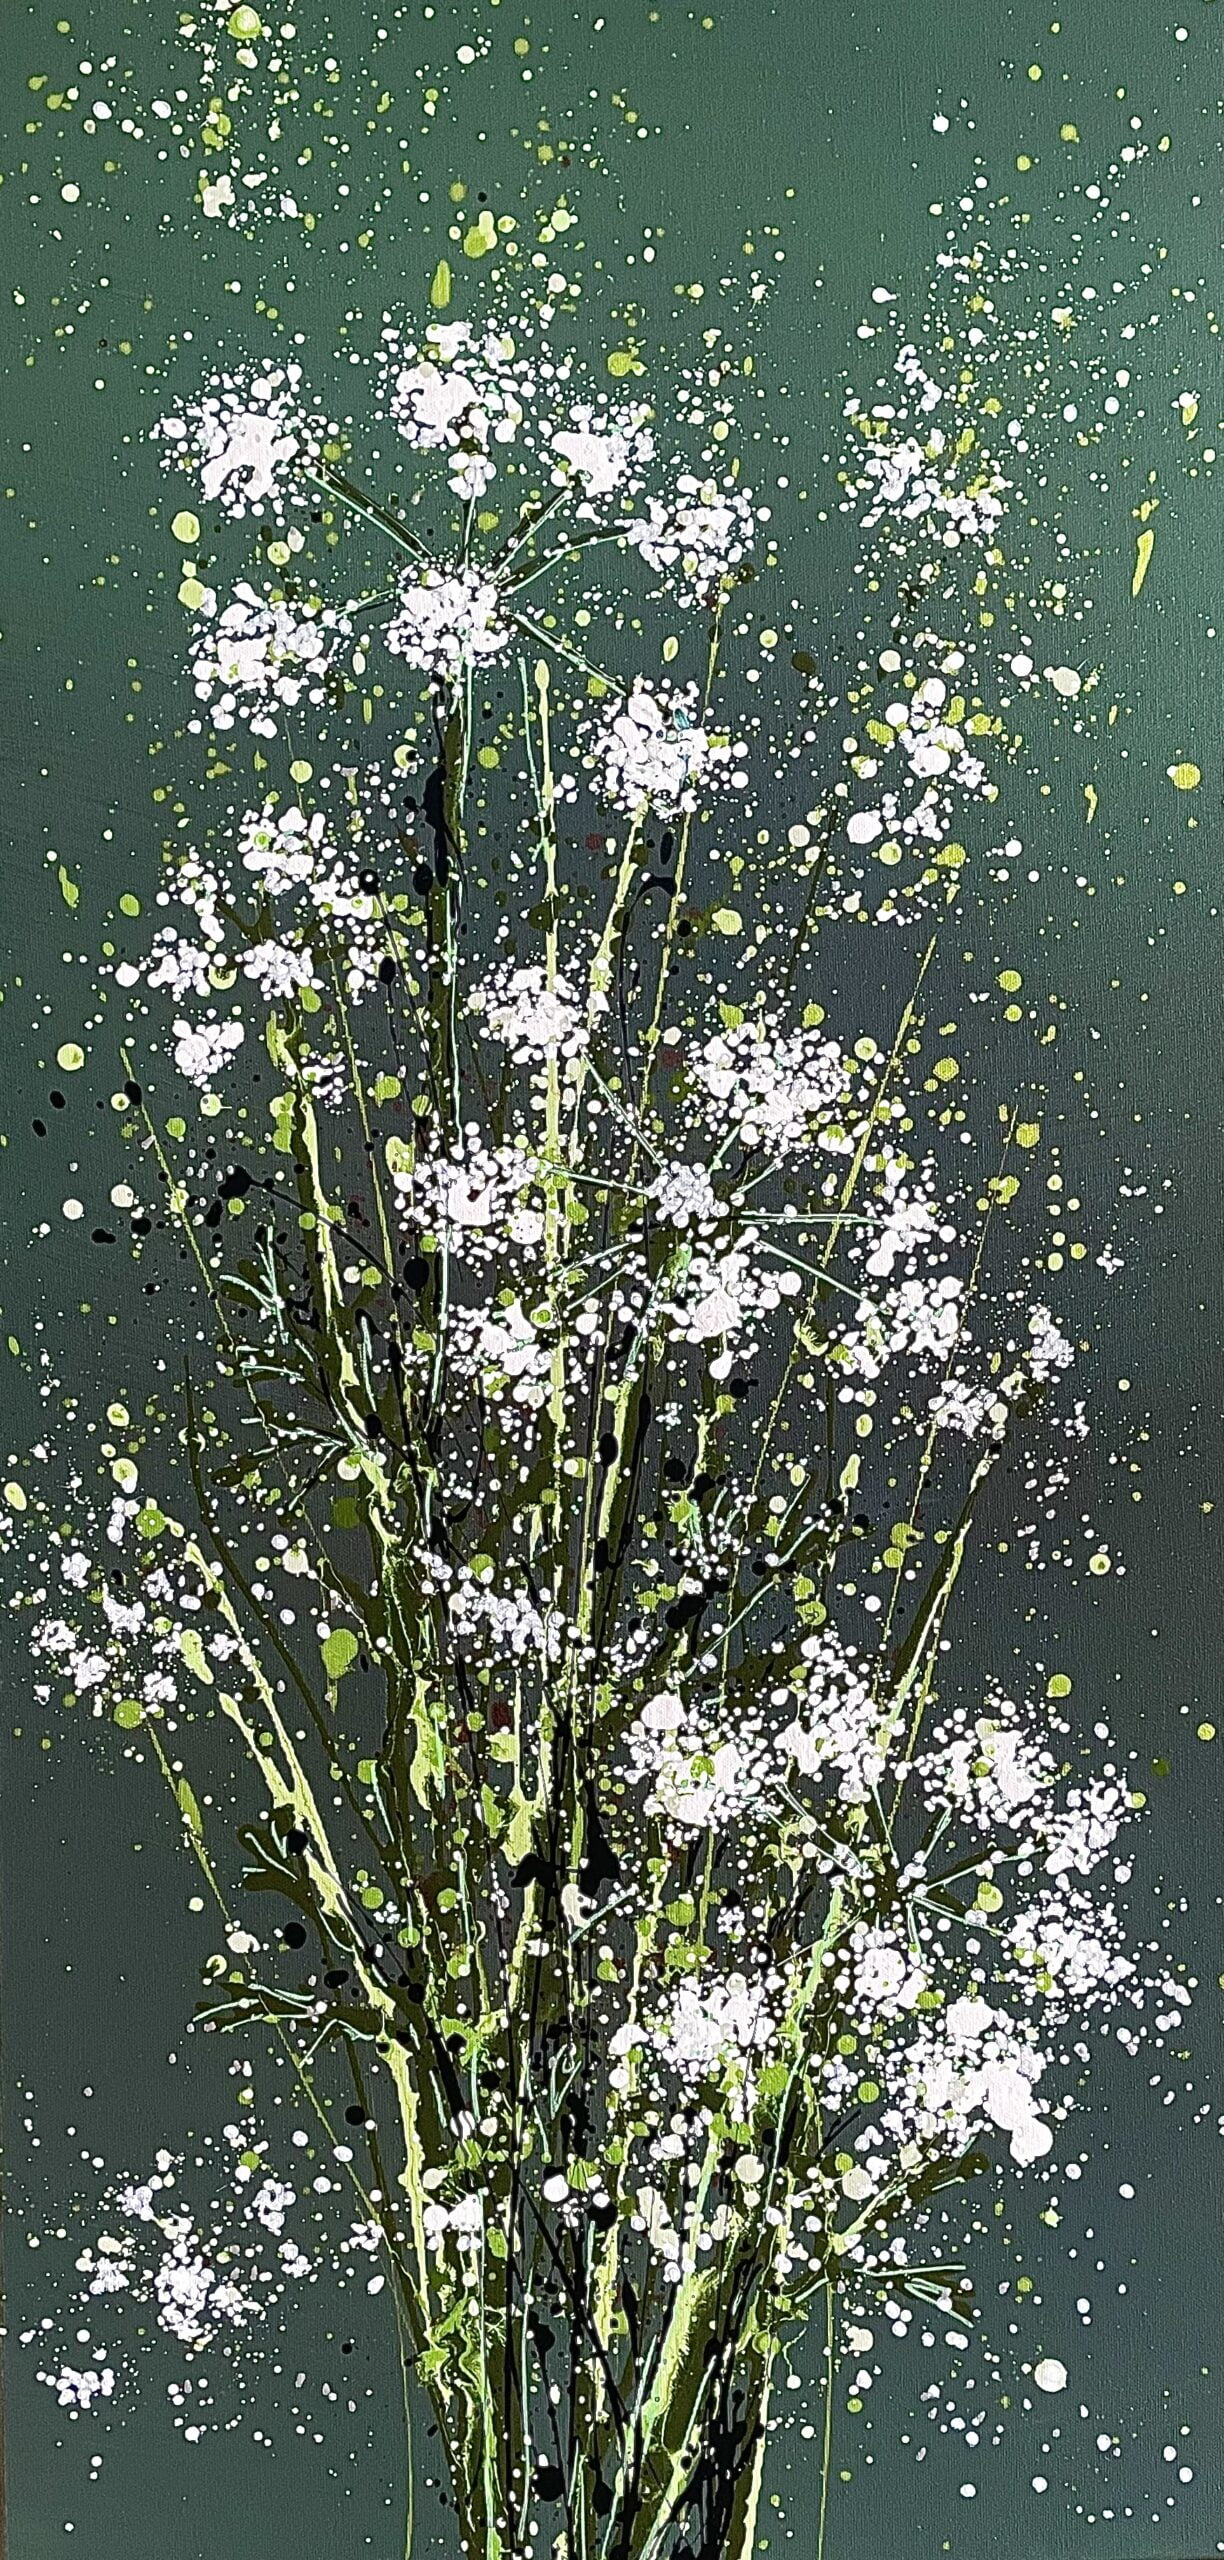 Country Cow Parsley 50x100x4cm